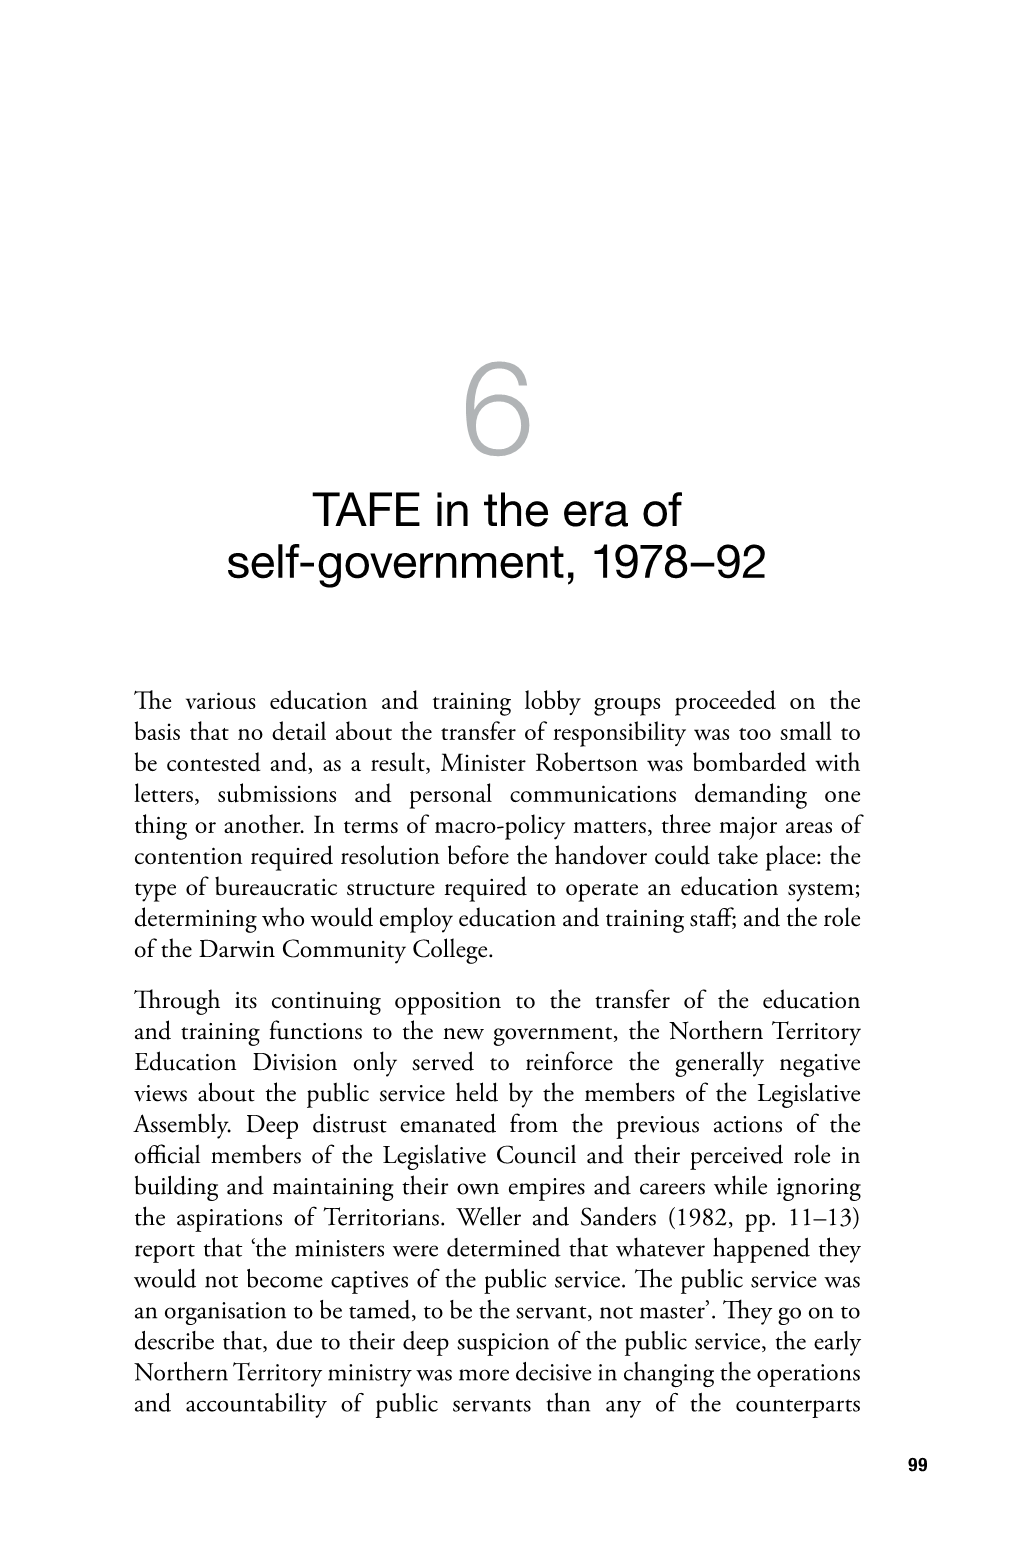 TAFE in the Era of Self-Government, 1978–92